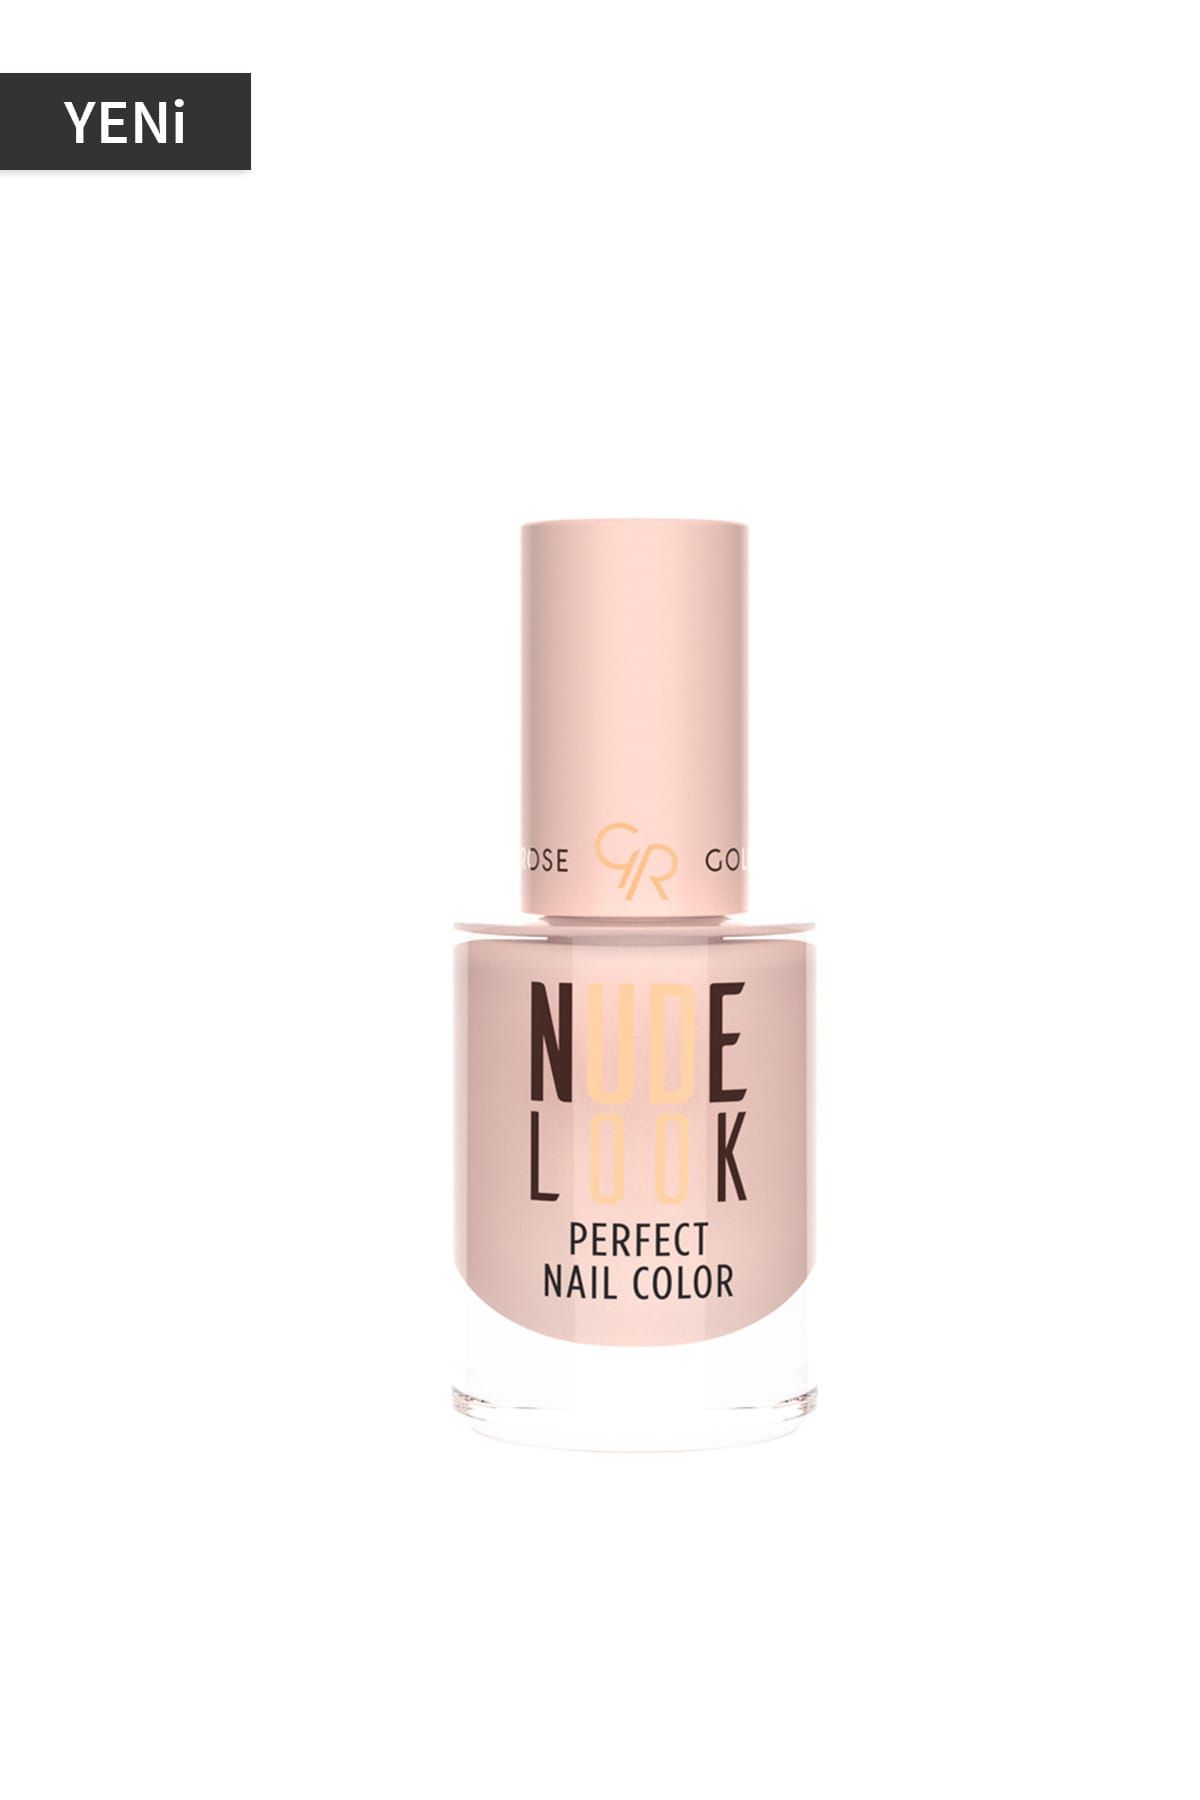 Golden Rose Oje - Nude Look Perfect Nail Color No:01 Powder Nude 8691190967369